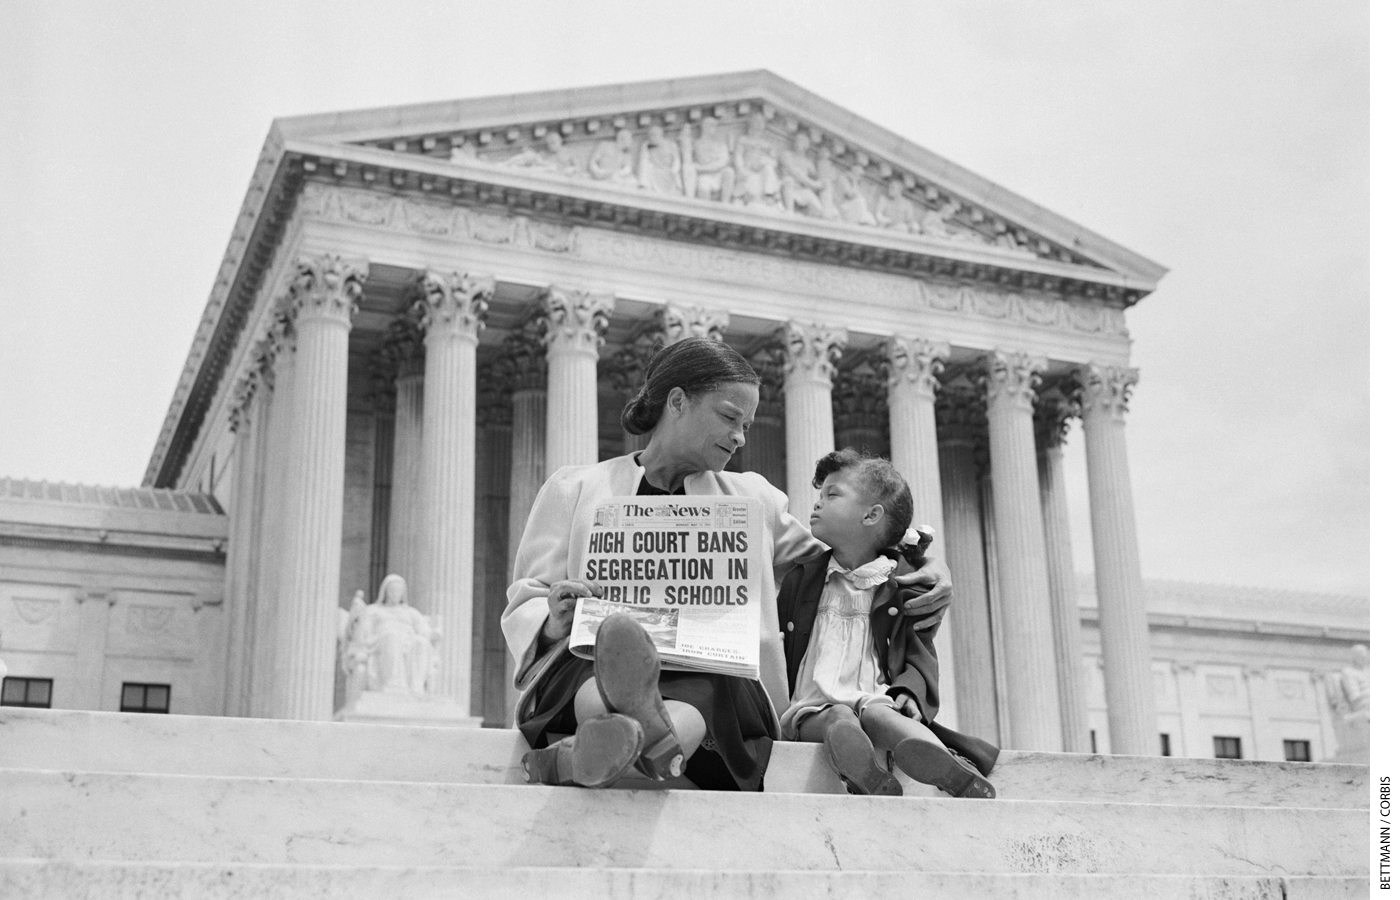 The Brown decision of 1954 is celebrated as an educational equality victory, but the path of desegregating schools has been rocky and remains unfinished.